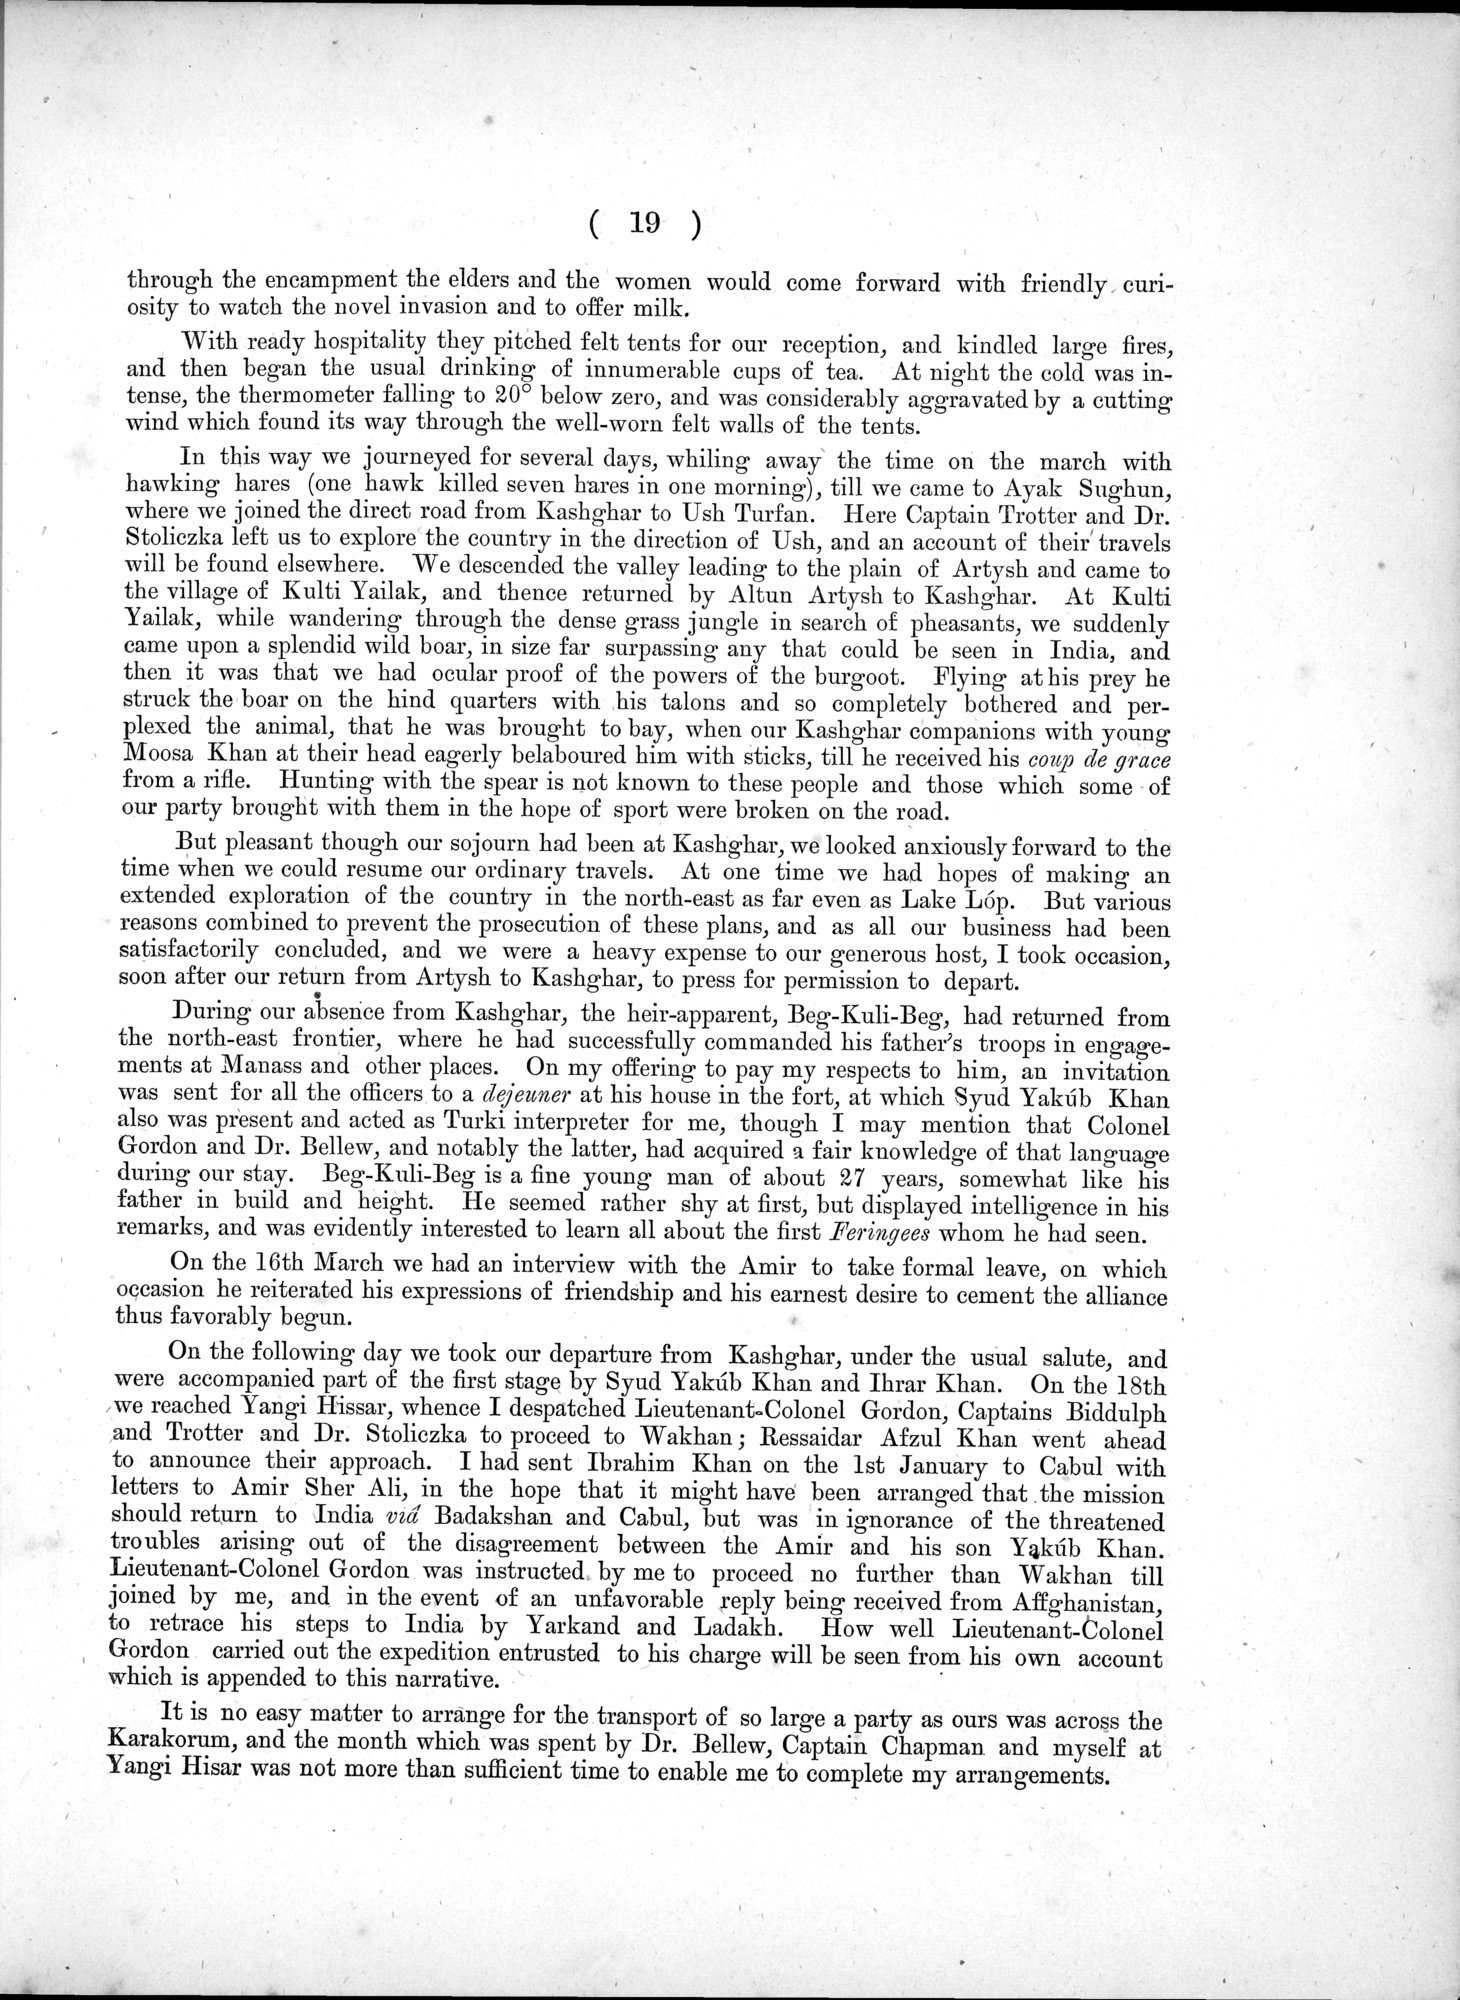 Report of a Mission to Yarkund in 1873 : vol.1 / Page 45 (Grayscale High Resolution Image)